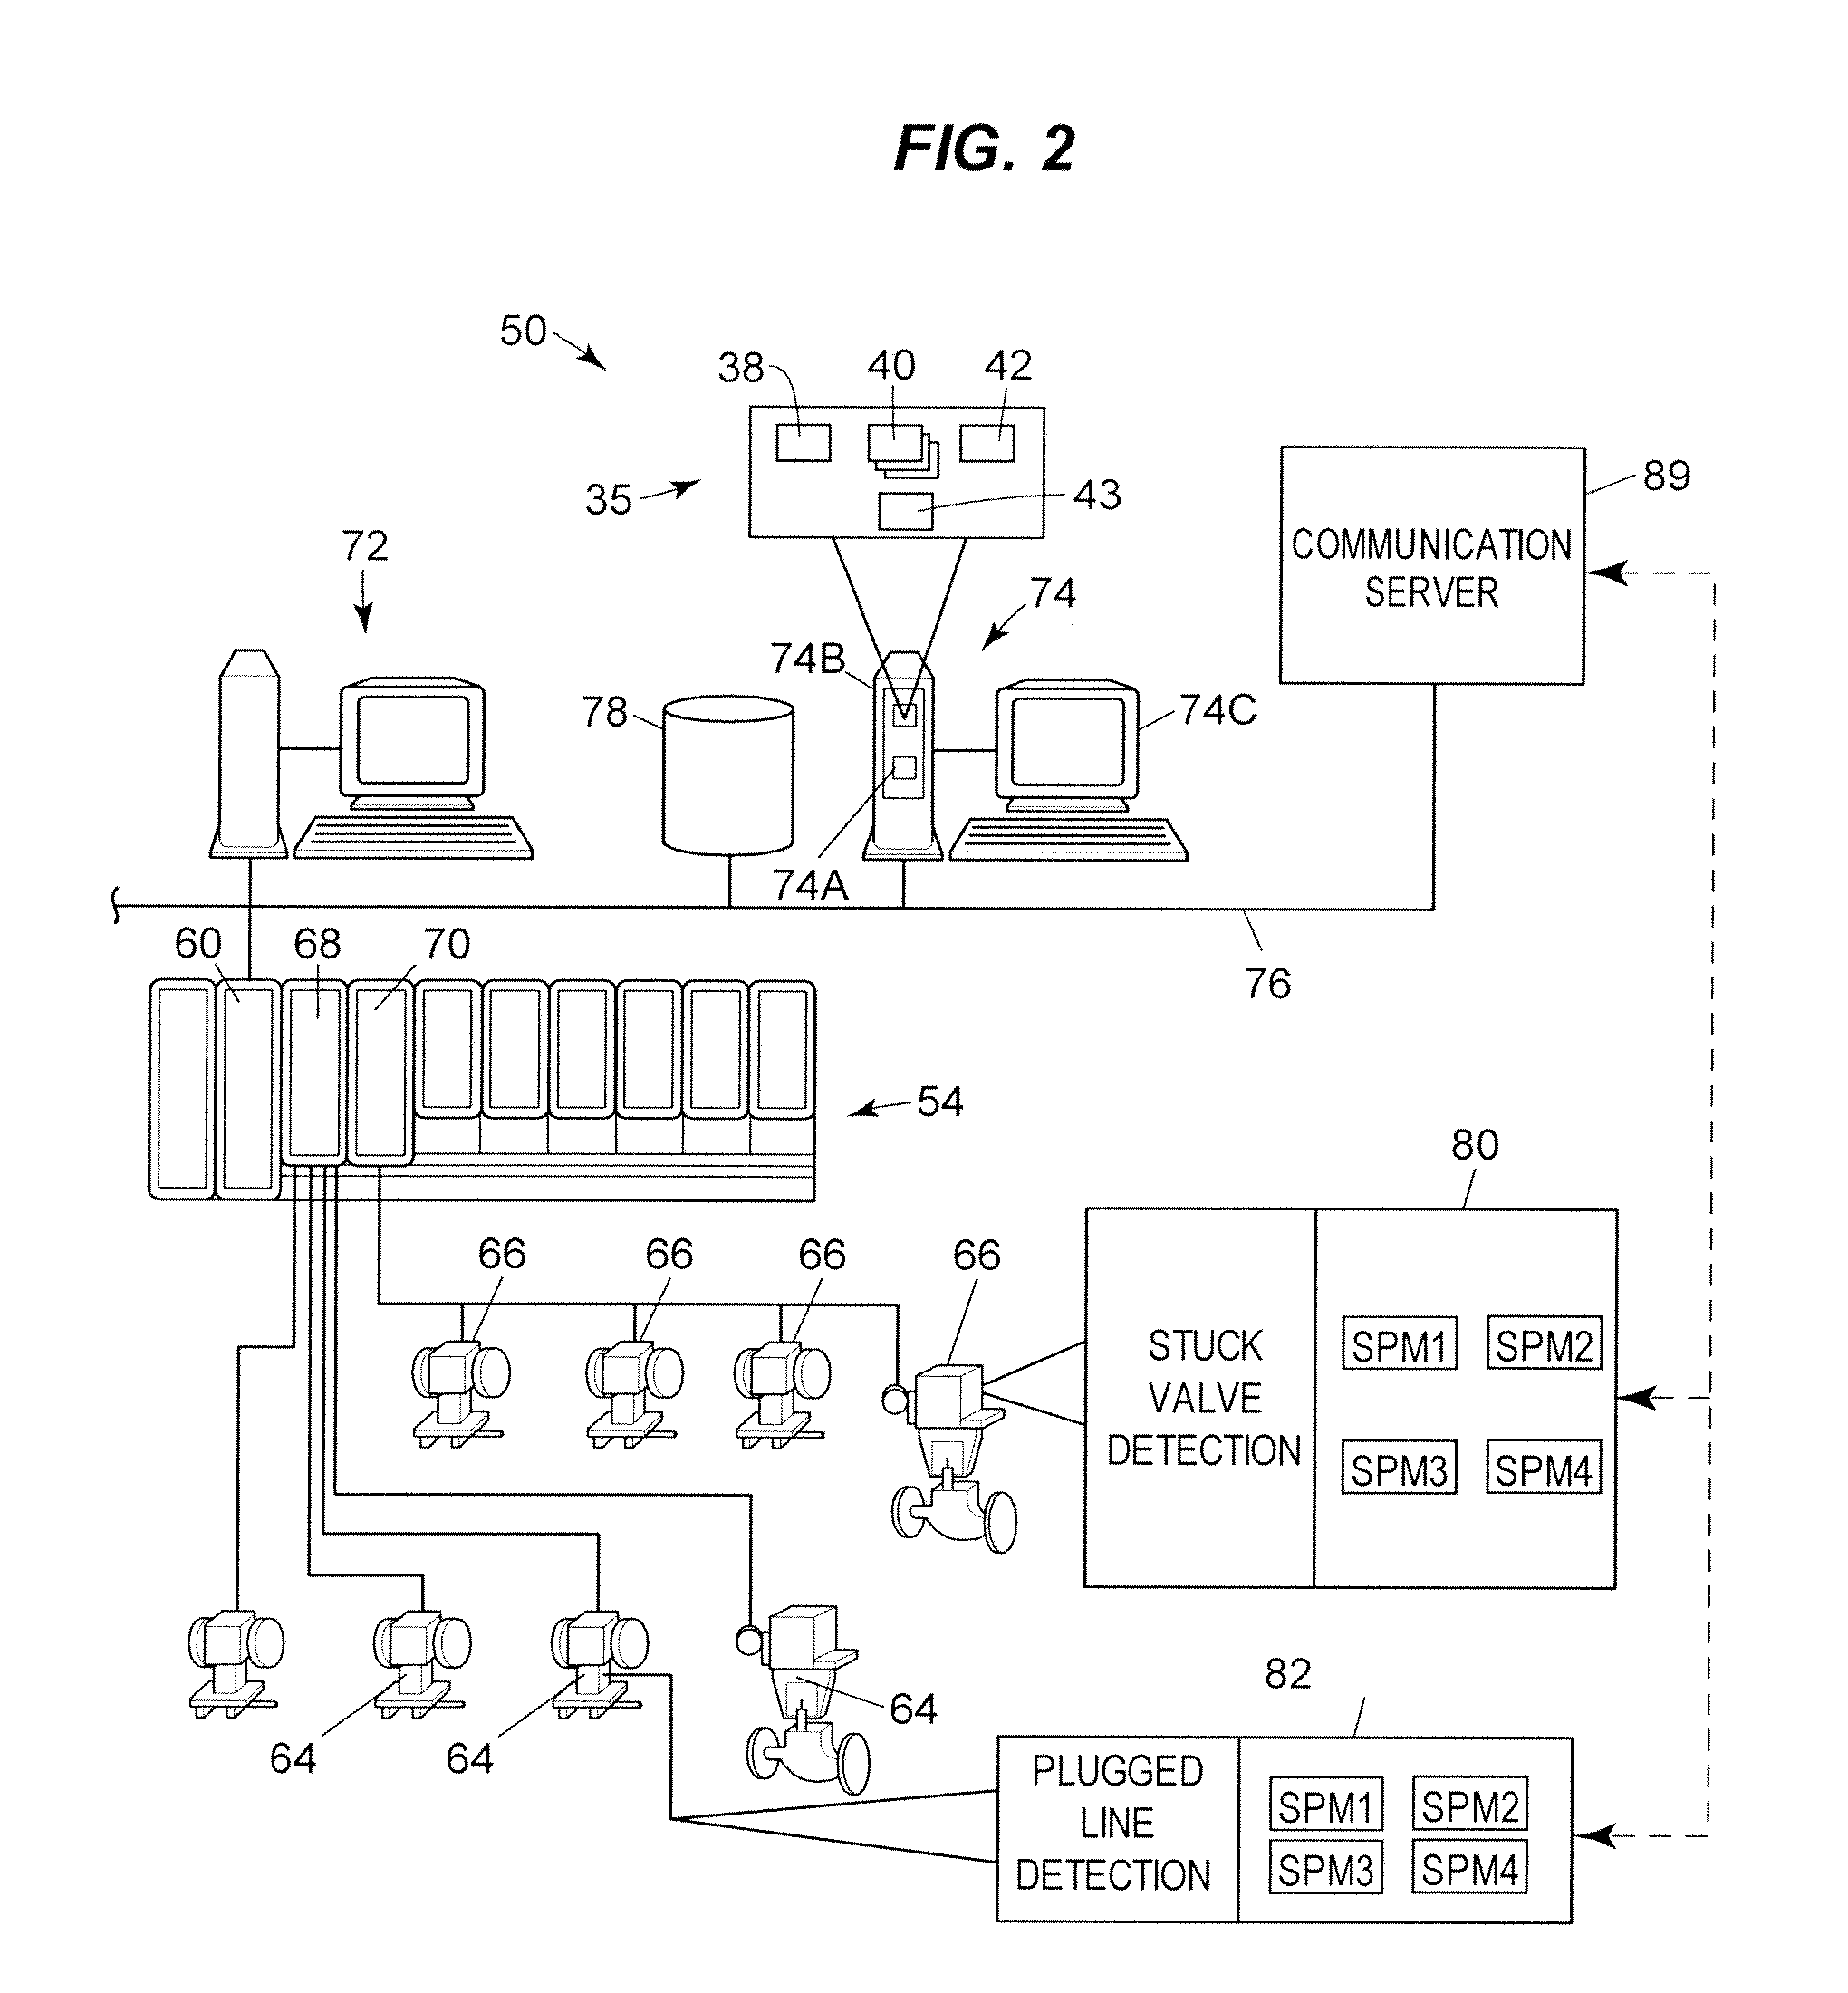 On-line multivariate analysis in a distributed process control system